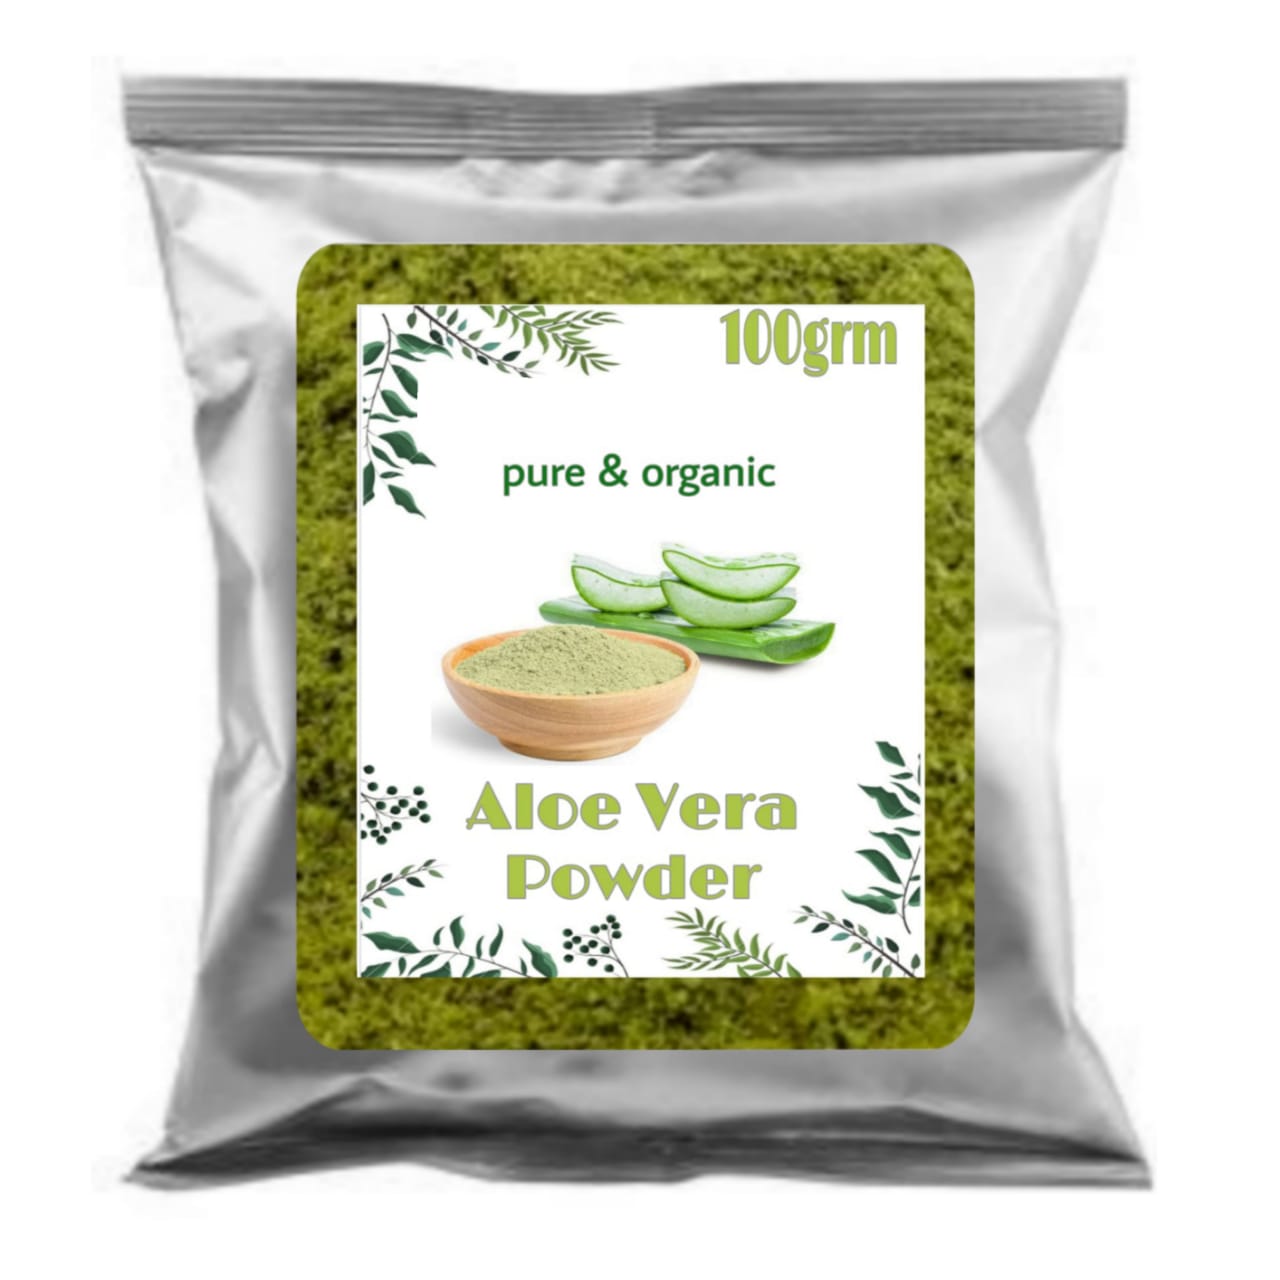  100% Natural & Organic Aloe Vera Powder (100gm)  for moisturizing, healing, soothing Face Pack/Hair Care for Healthy Hair & Growth